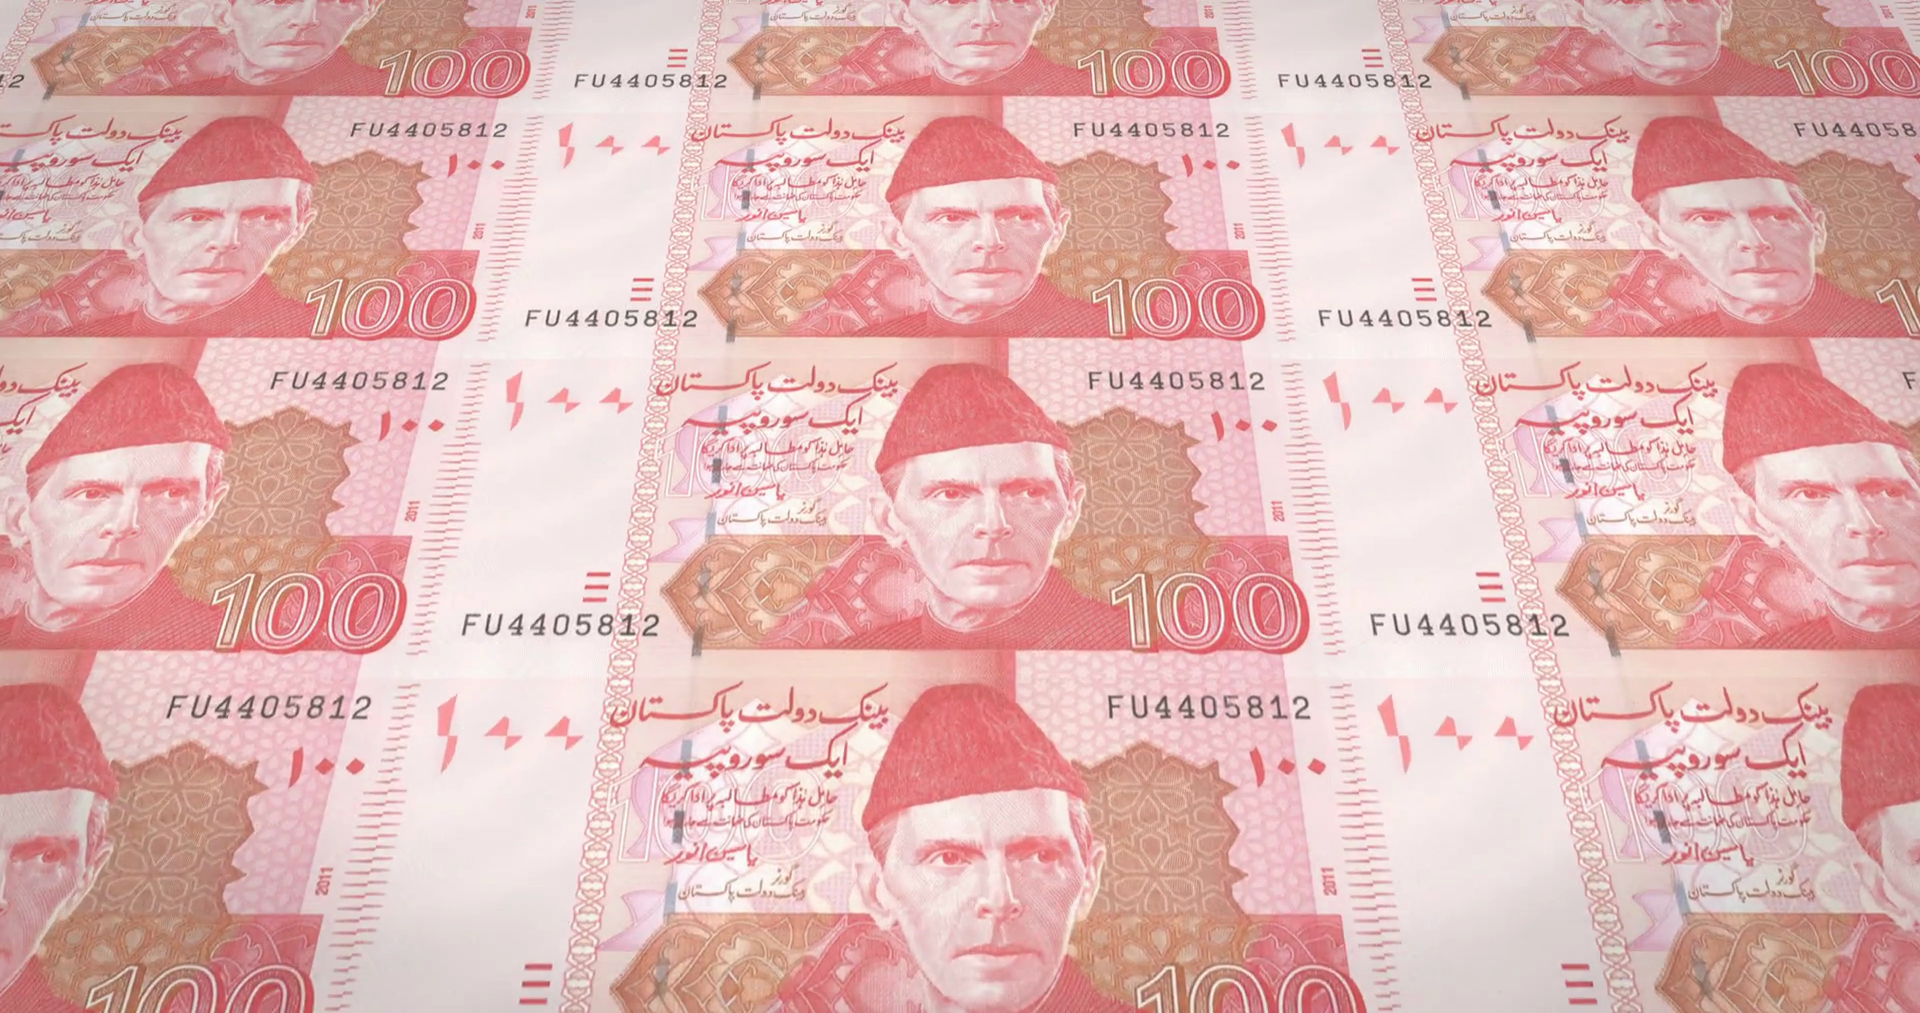 Banknotes of one hundred Pakistani rupees of Pakistan rolling, cash ...